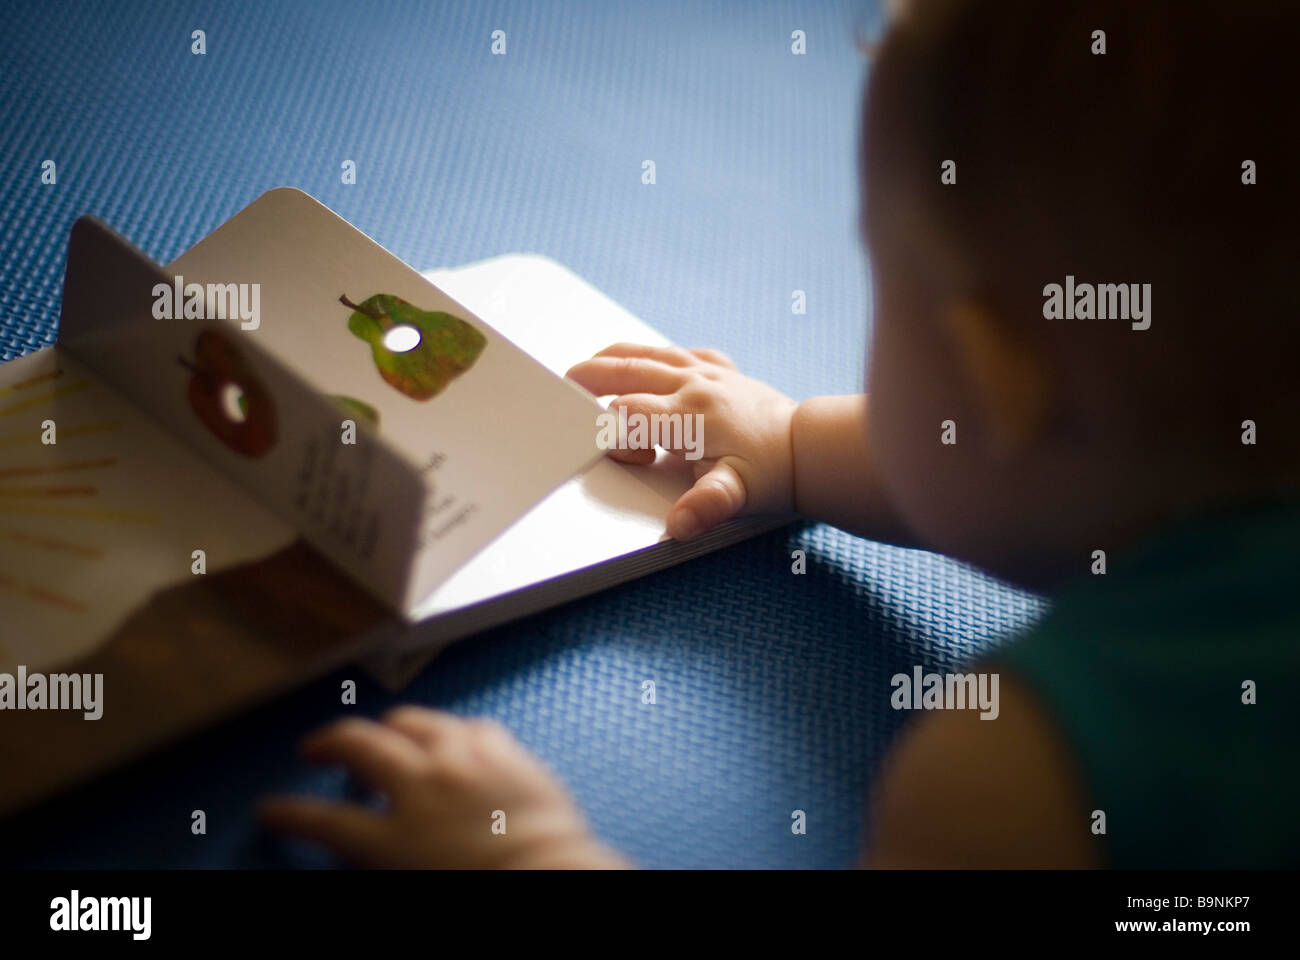 Baby reading a book Stock Photo